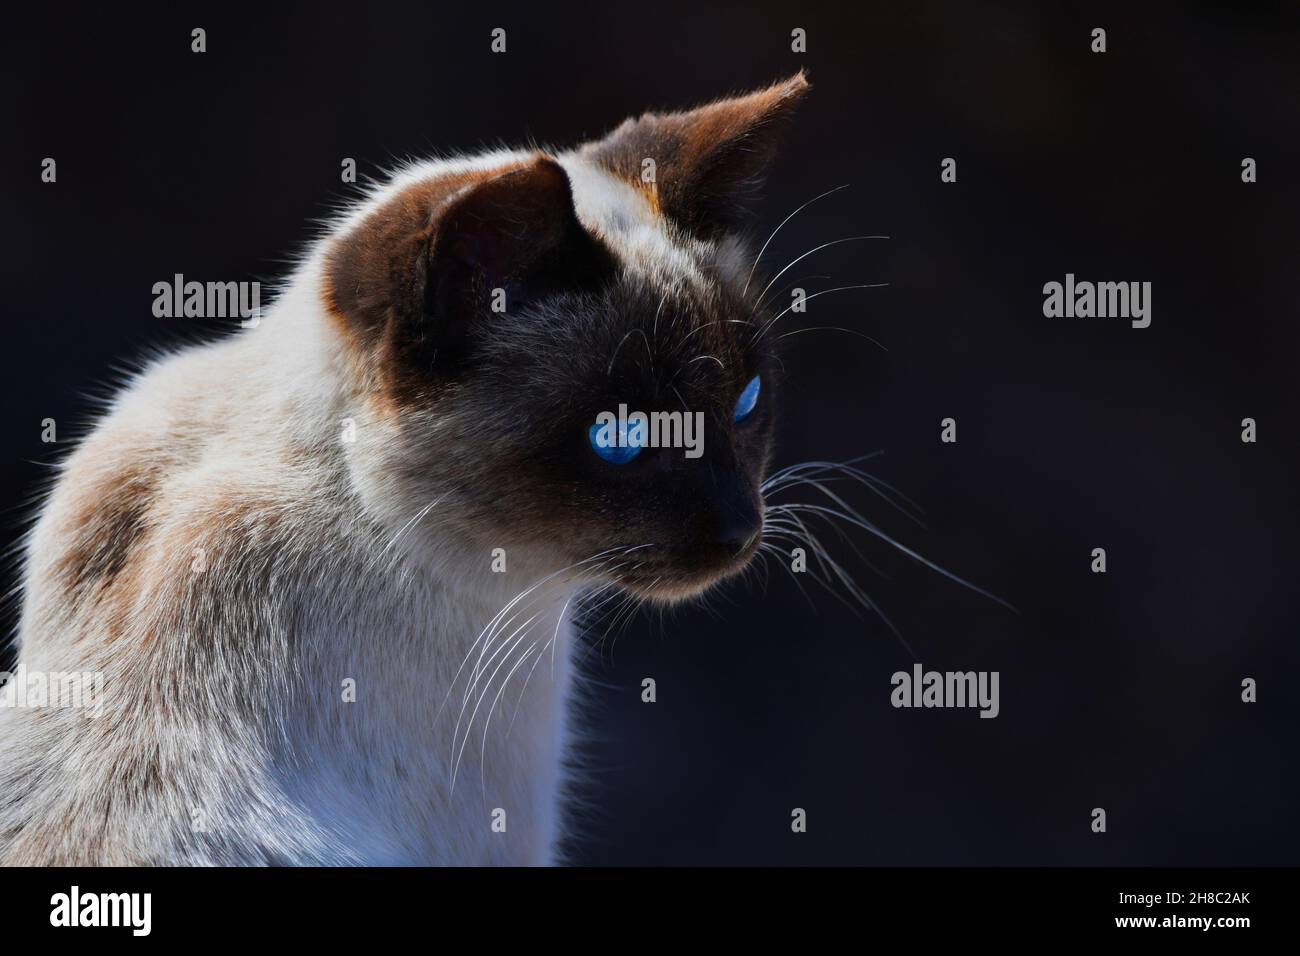 Portrait of a seal point cat with bright blue eyes. The background is dark. Lanzarote, Spain. Stock Photo